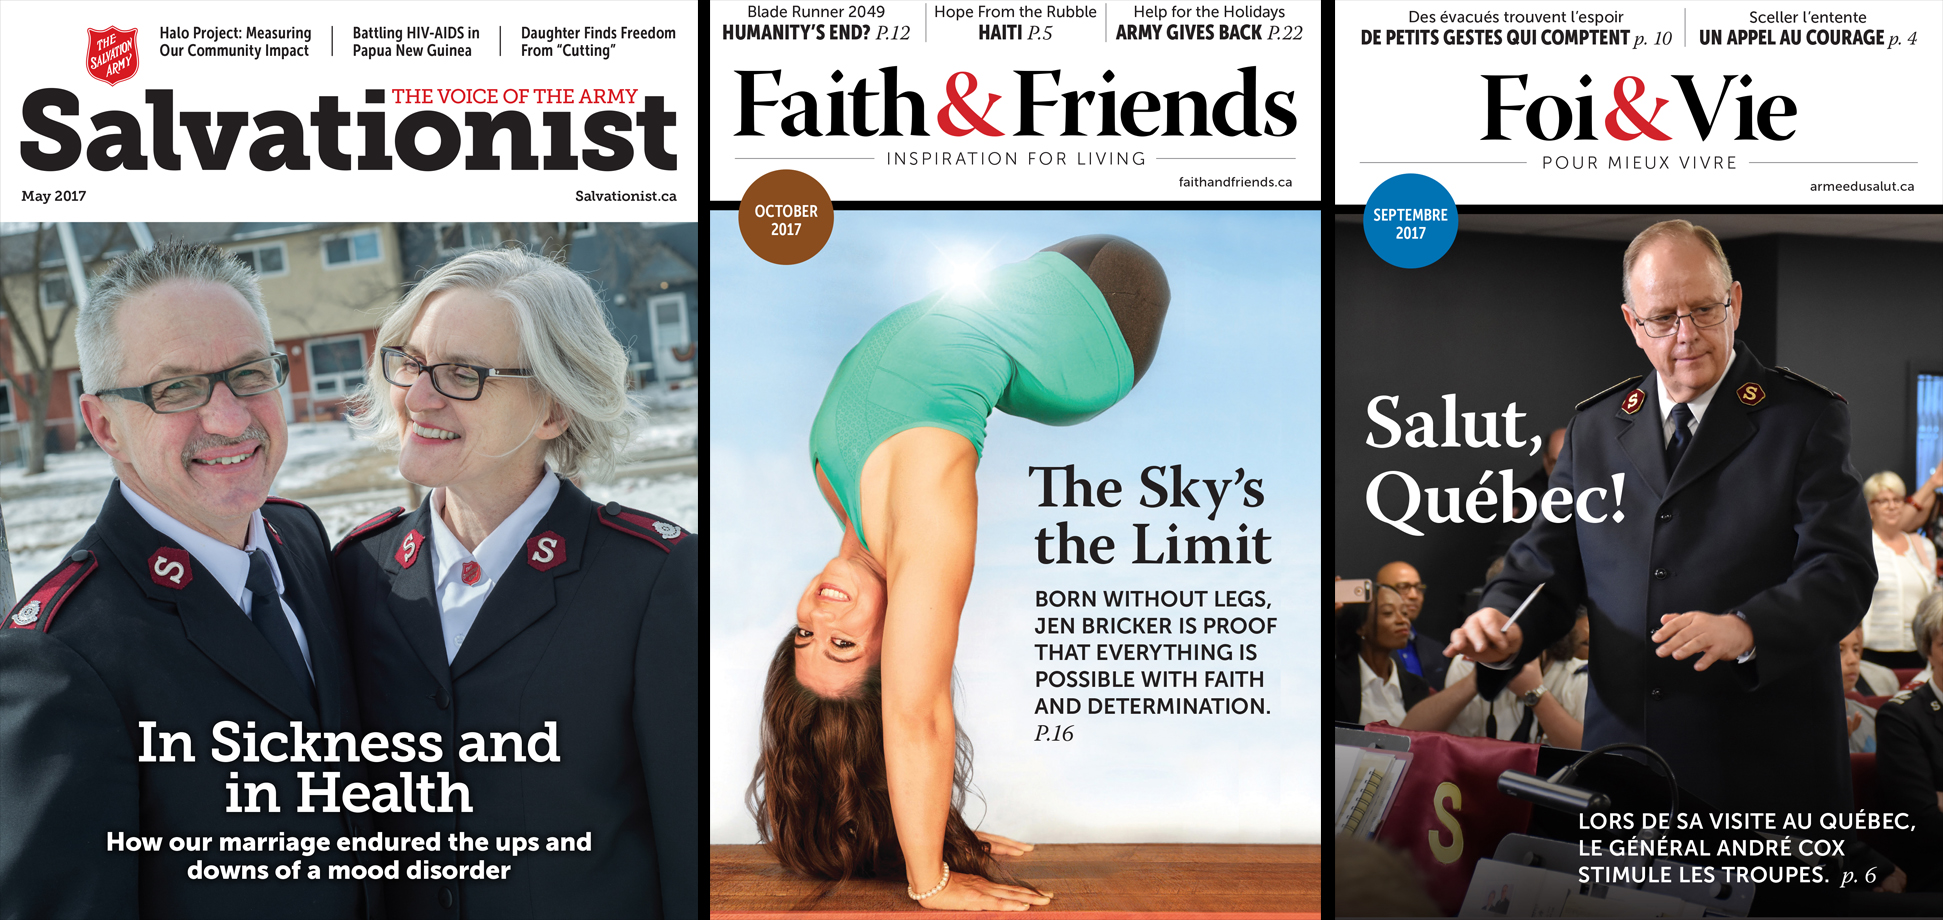 The Canada and Bermuda Tty publishes three magazines: Salvationist, Faith & Friends and Foi & Vie